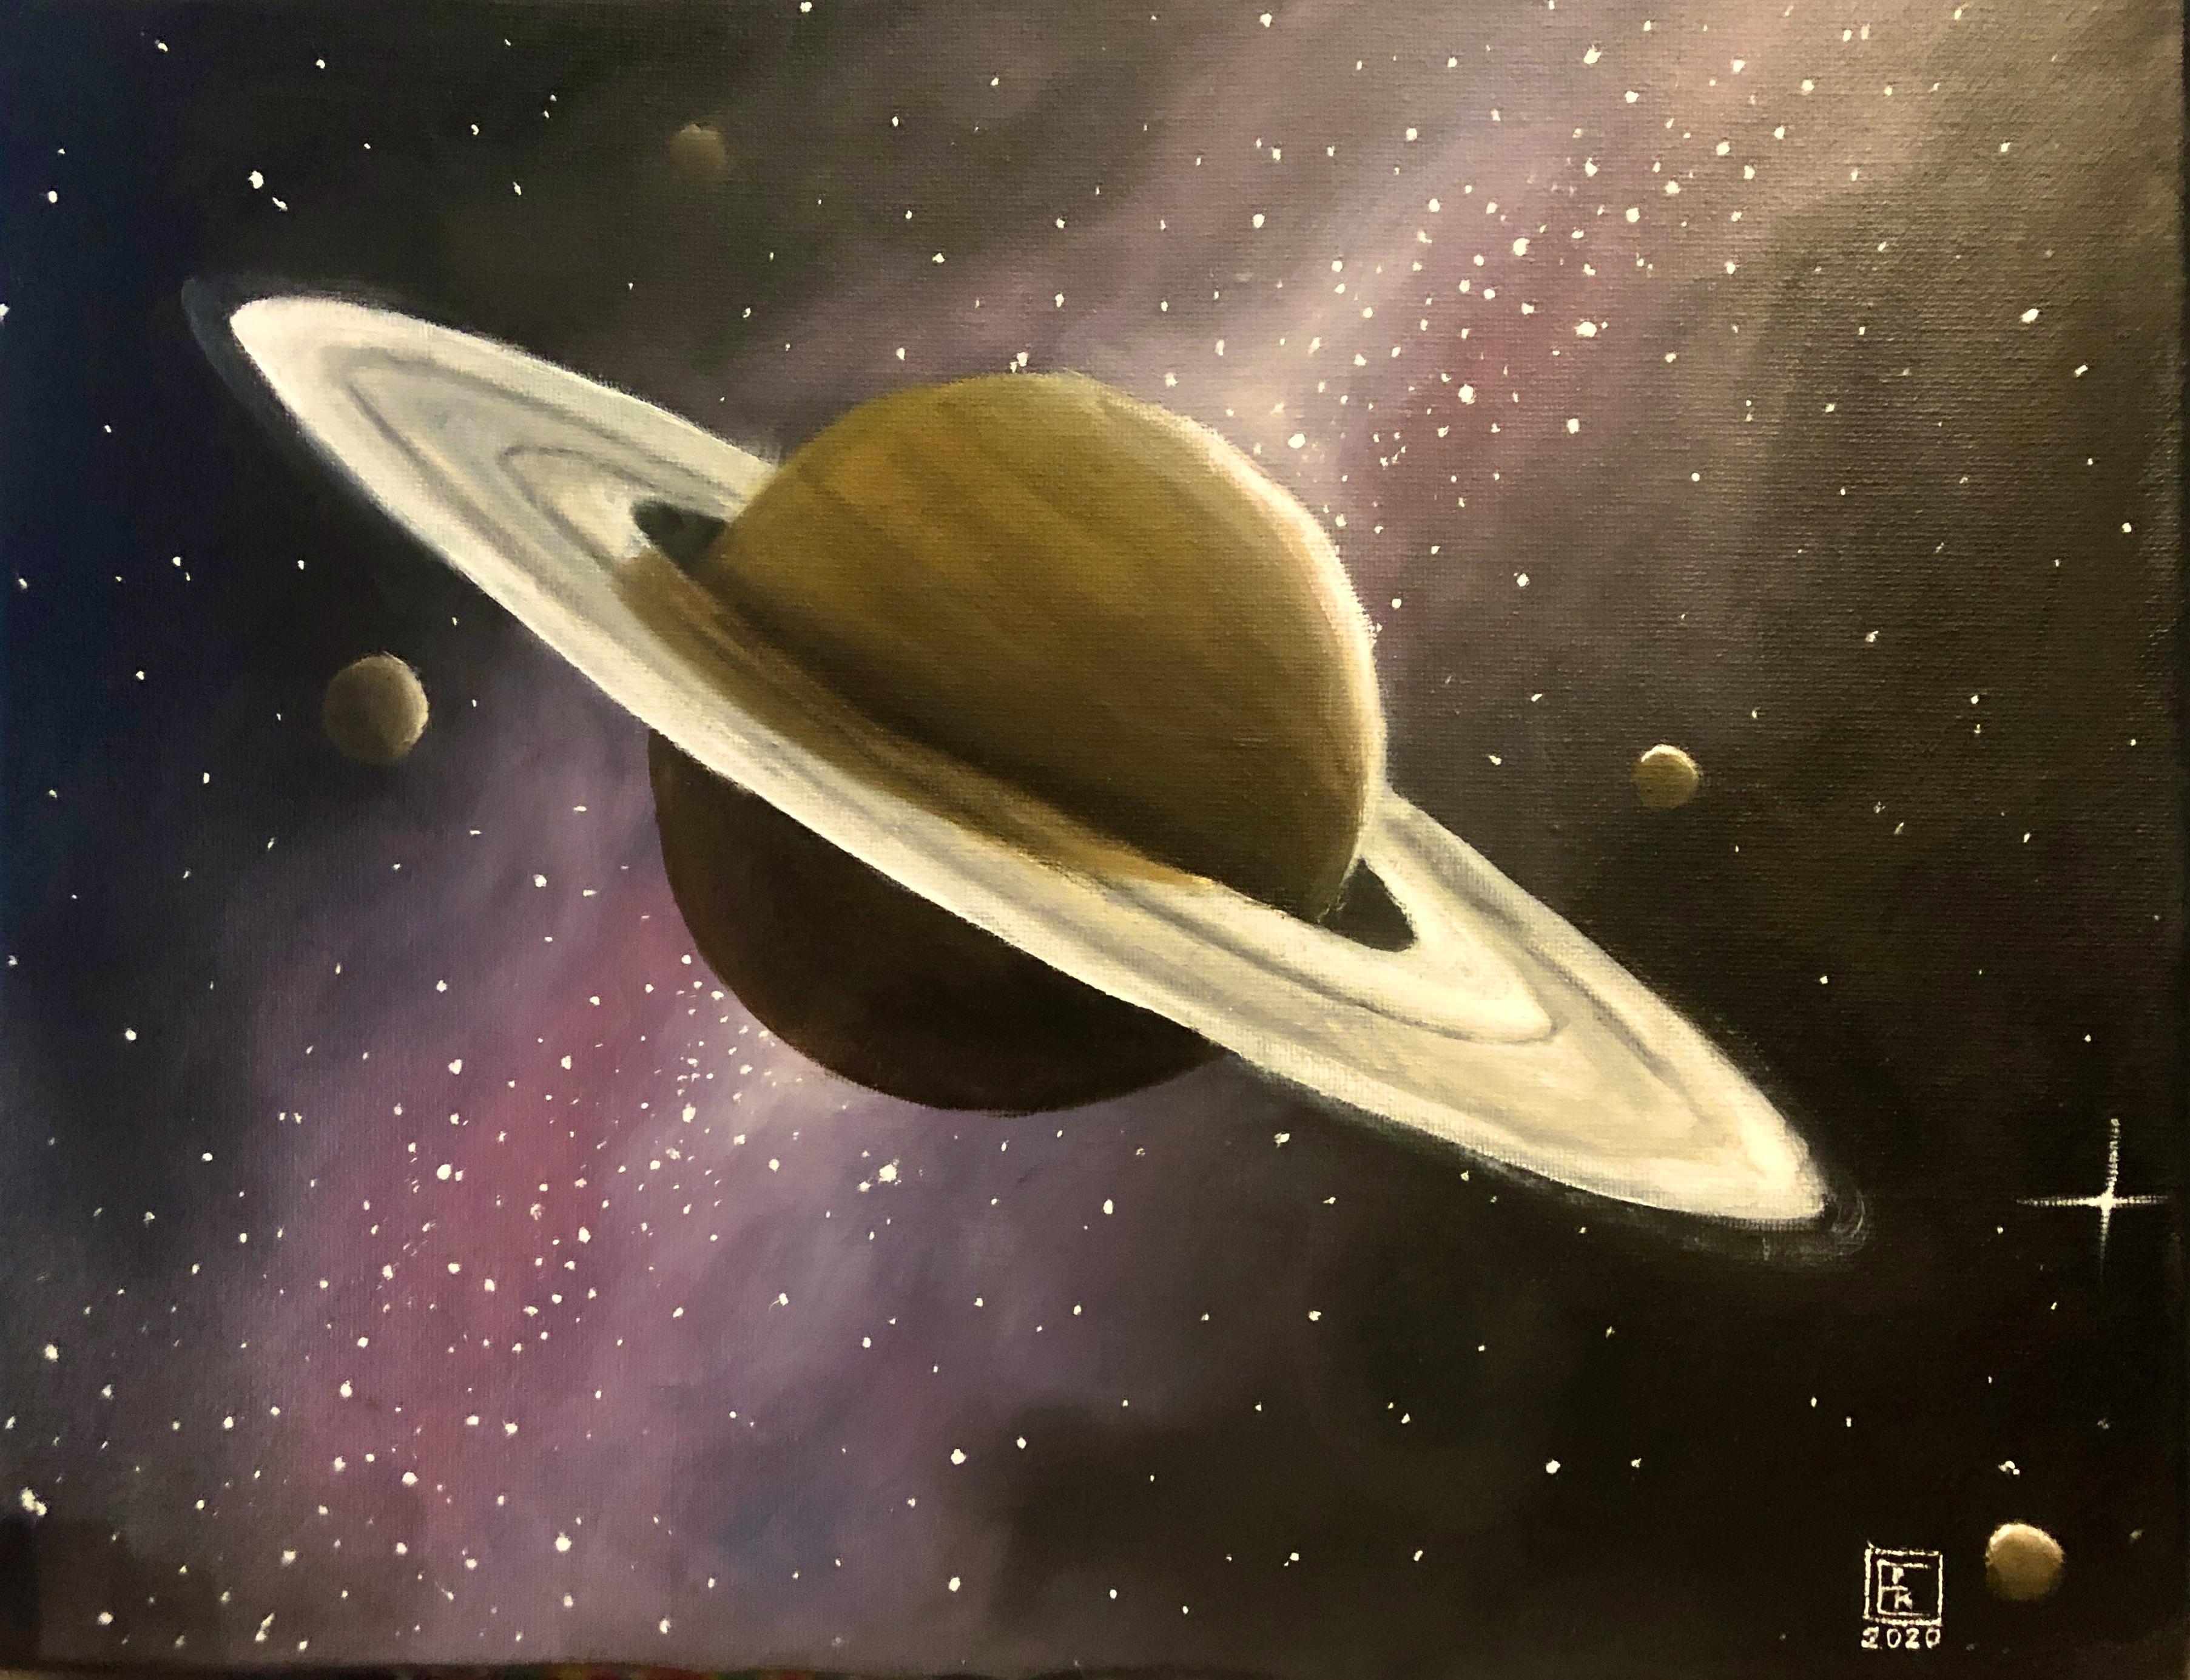 Oil painting of Saturn I did earlier this year. What do you guys think?